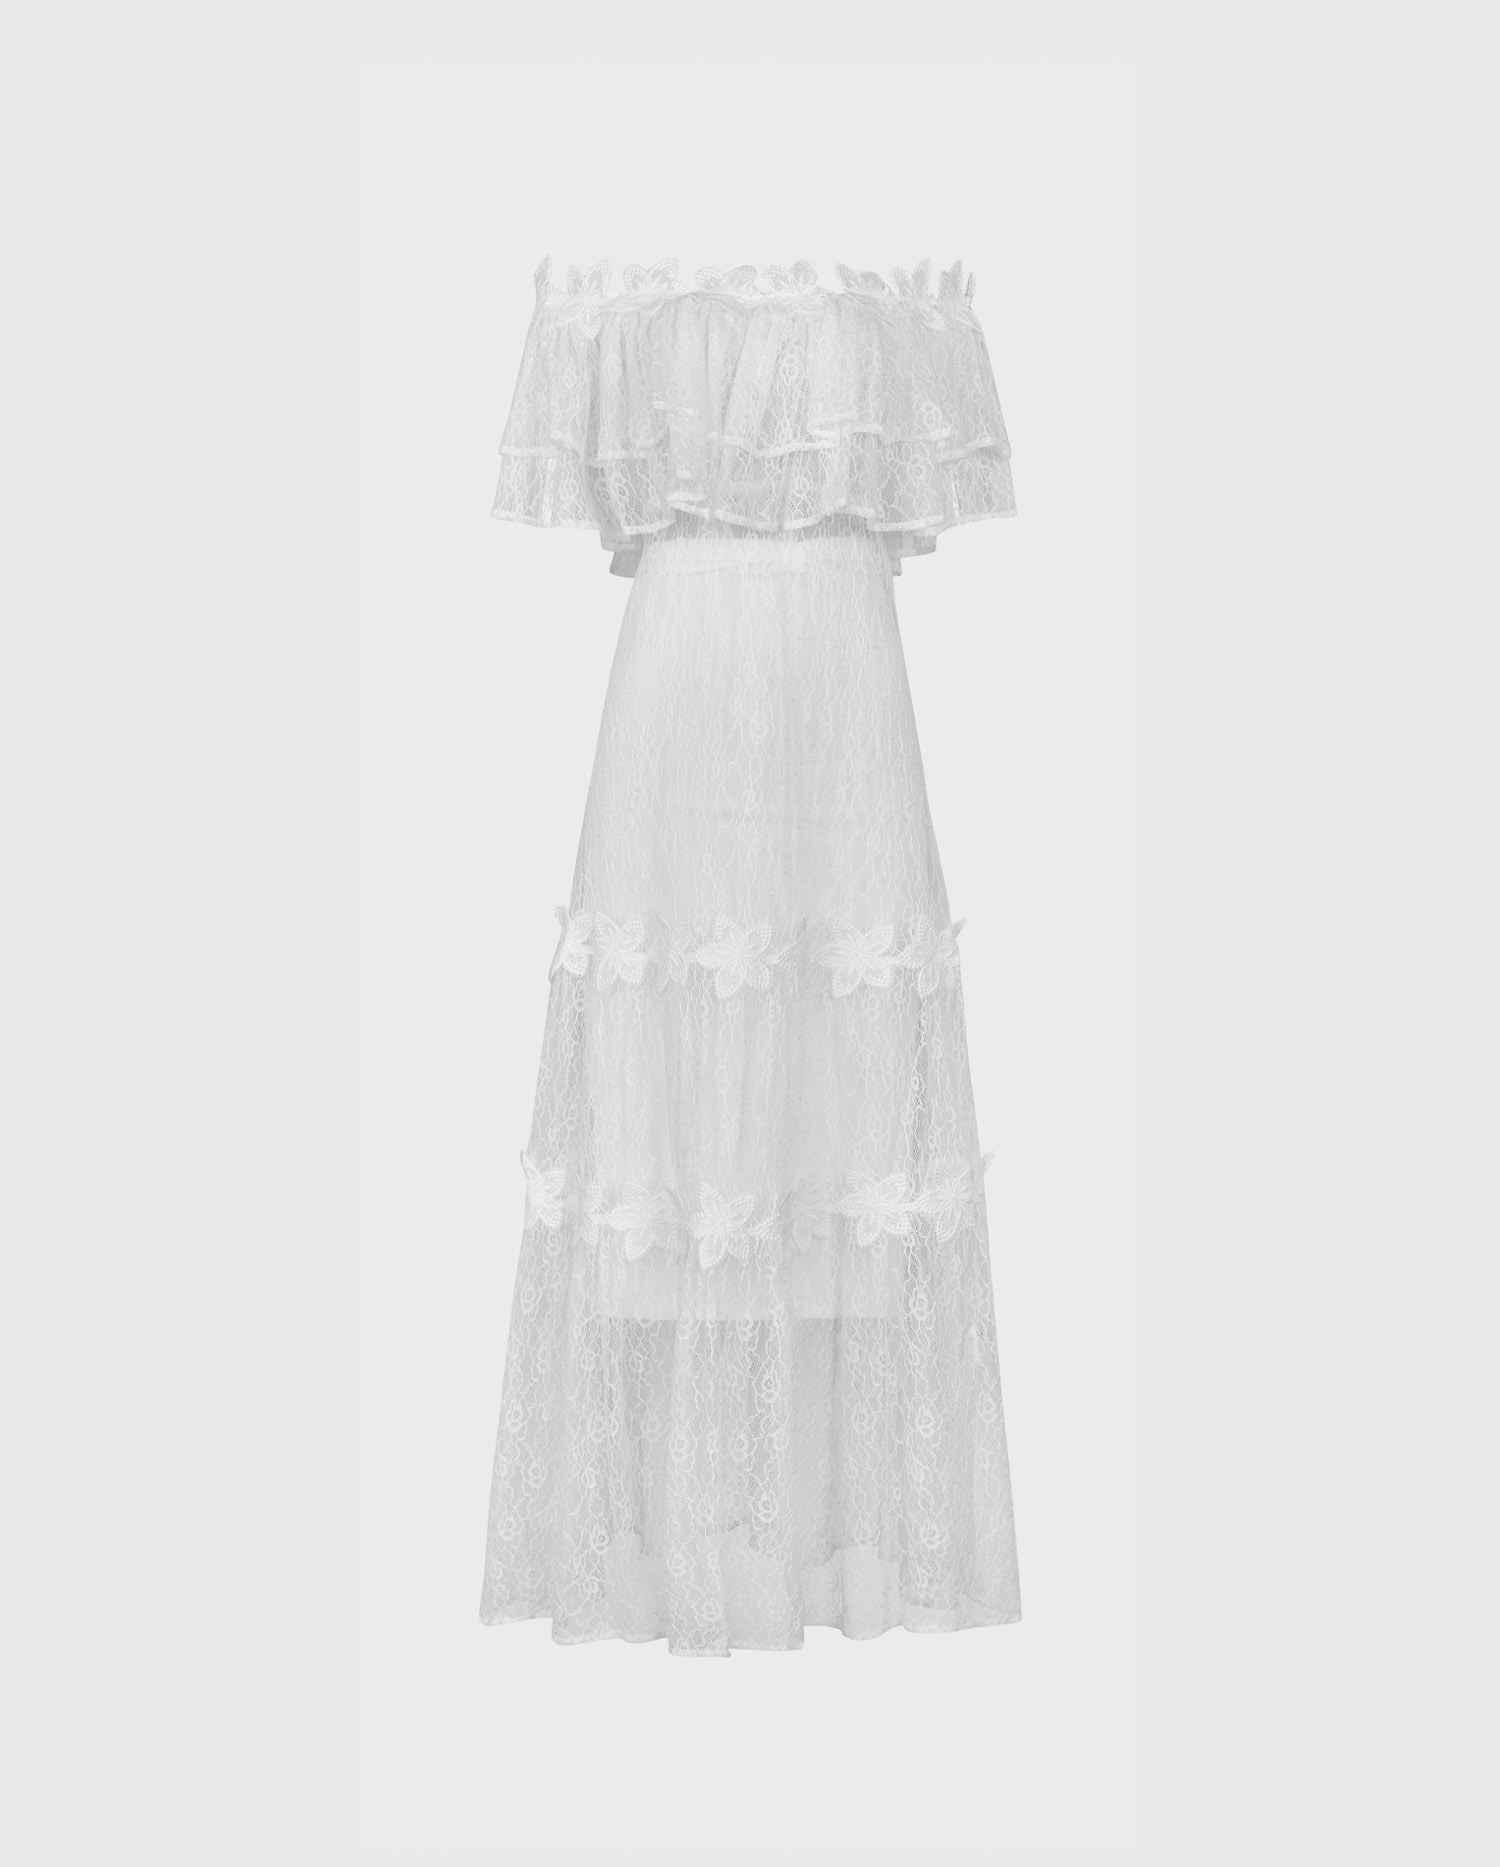 Discover the ALOHA white off the shoulder lace dress from ANNE FONTAINE